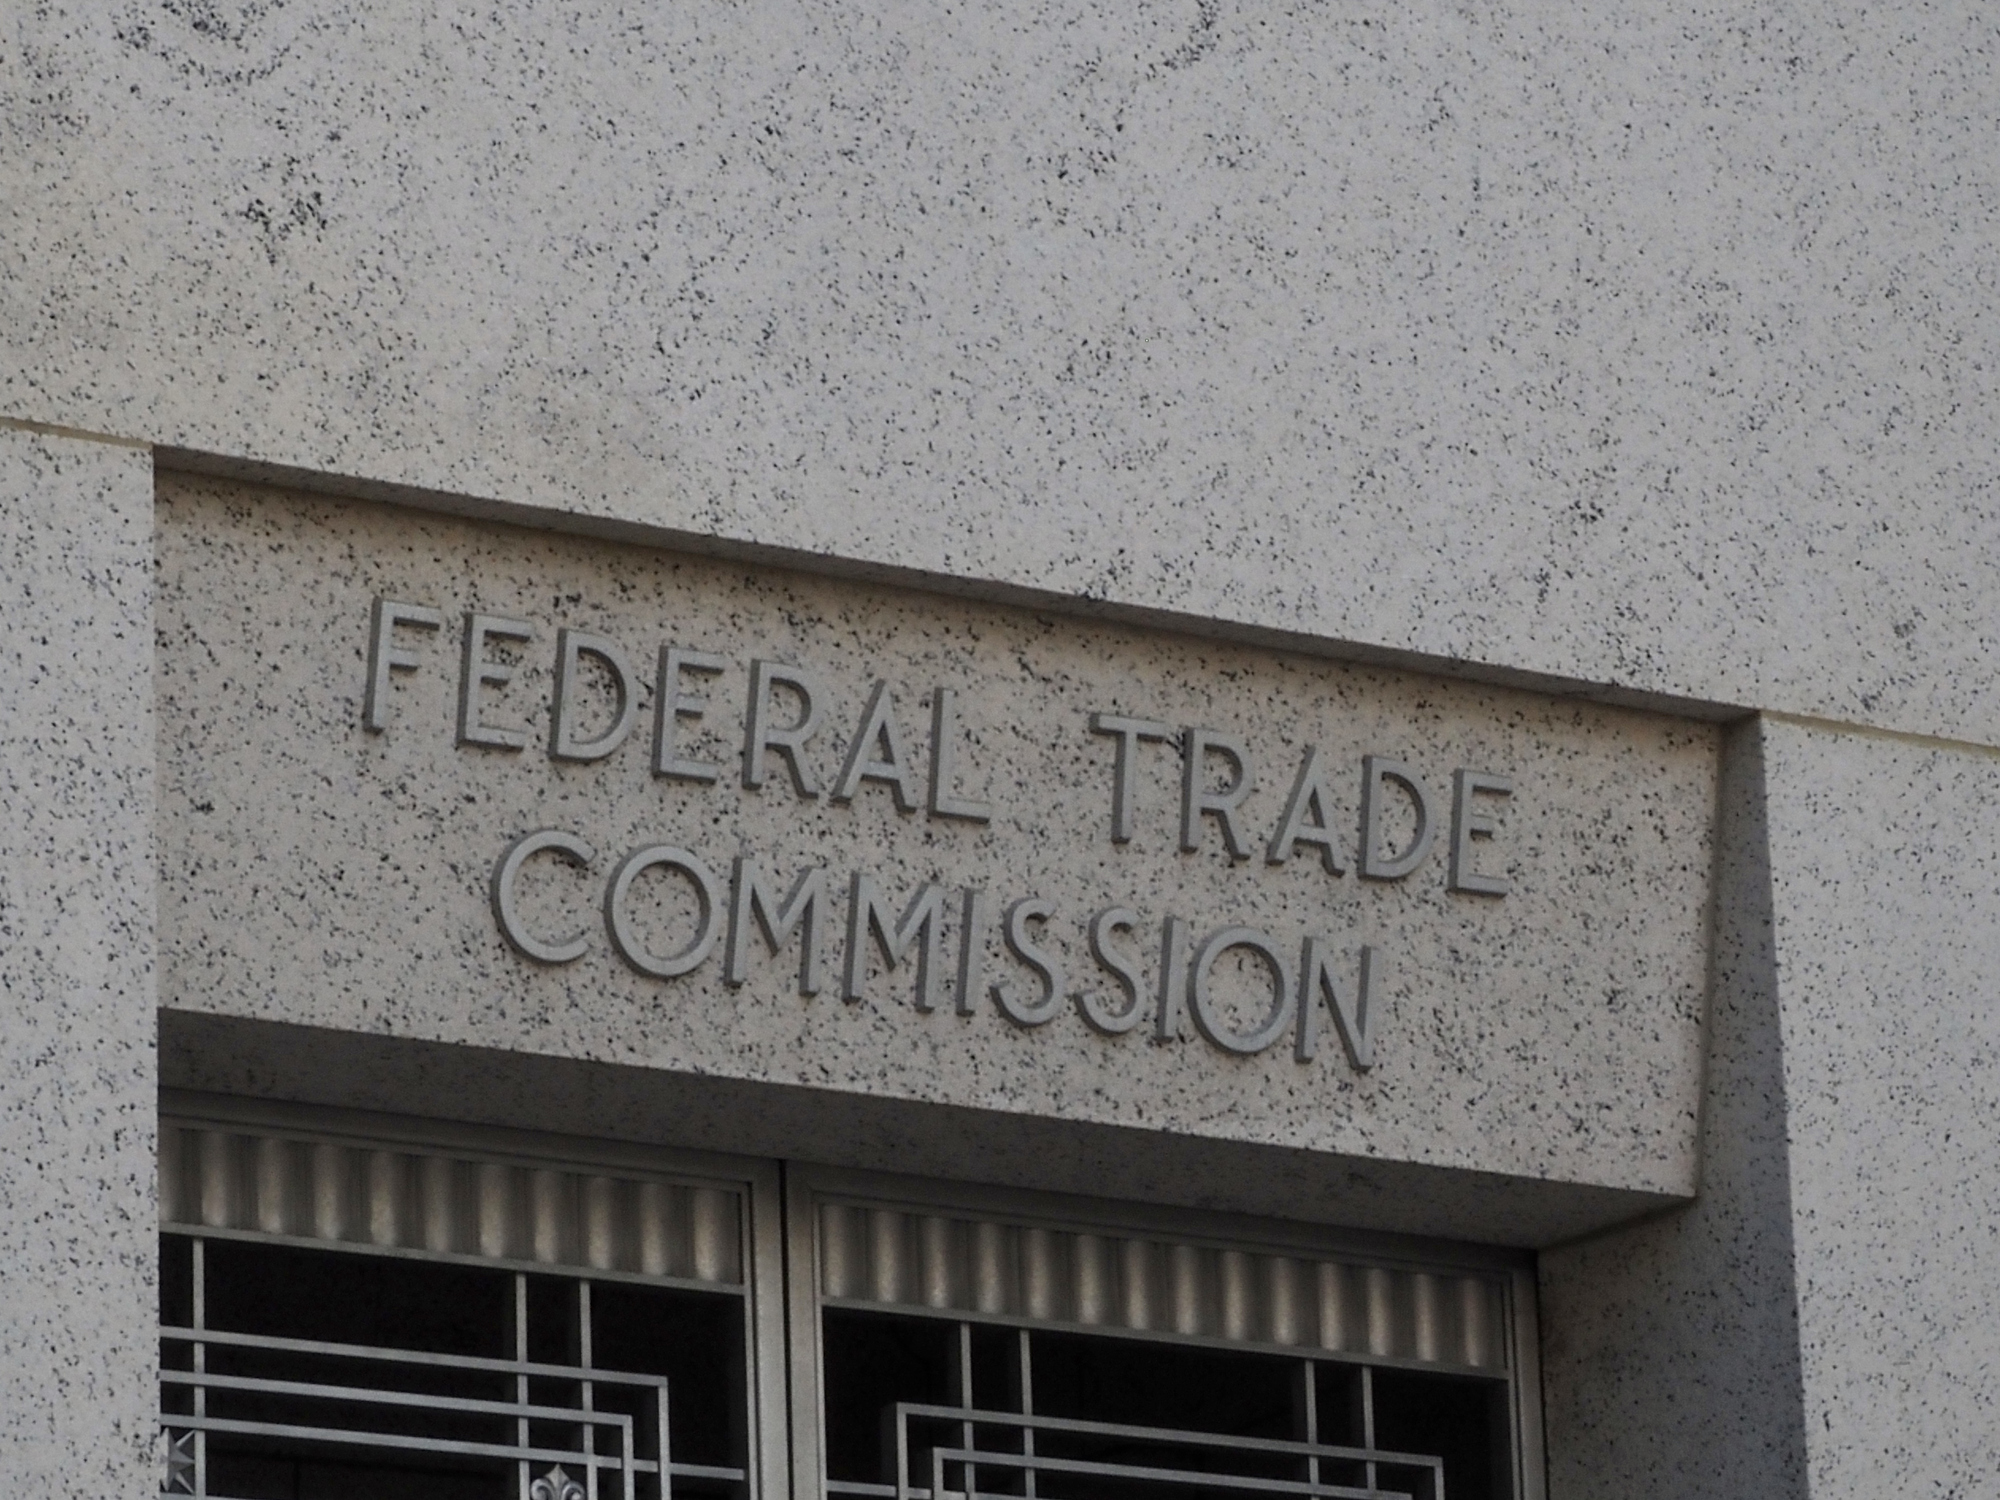 IAB Responds to the Federal Trade Commission’s Latest Overreach